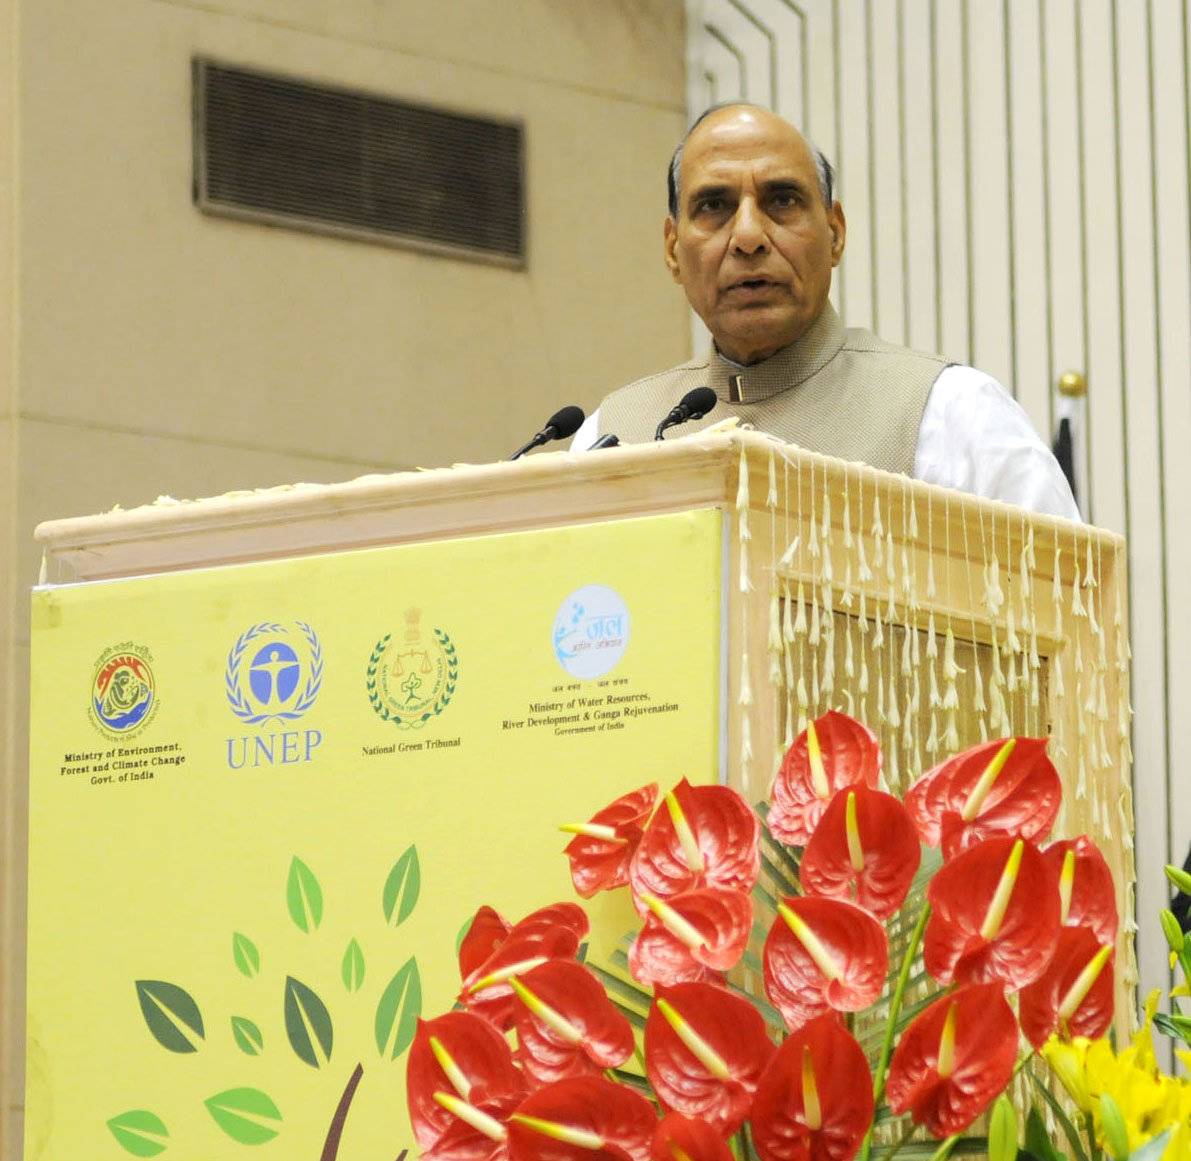 The Union Home Minister, Shri Rajnath Singh delivering the Valedictory address at the International Conference on Rule of Law for Supporting 2030 Development Agenda, in New Delhi on March 06, 2016.